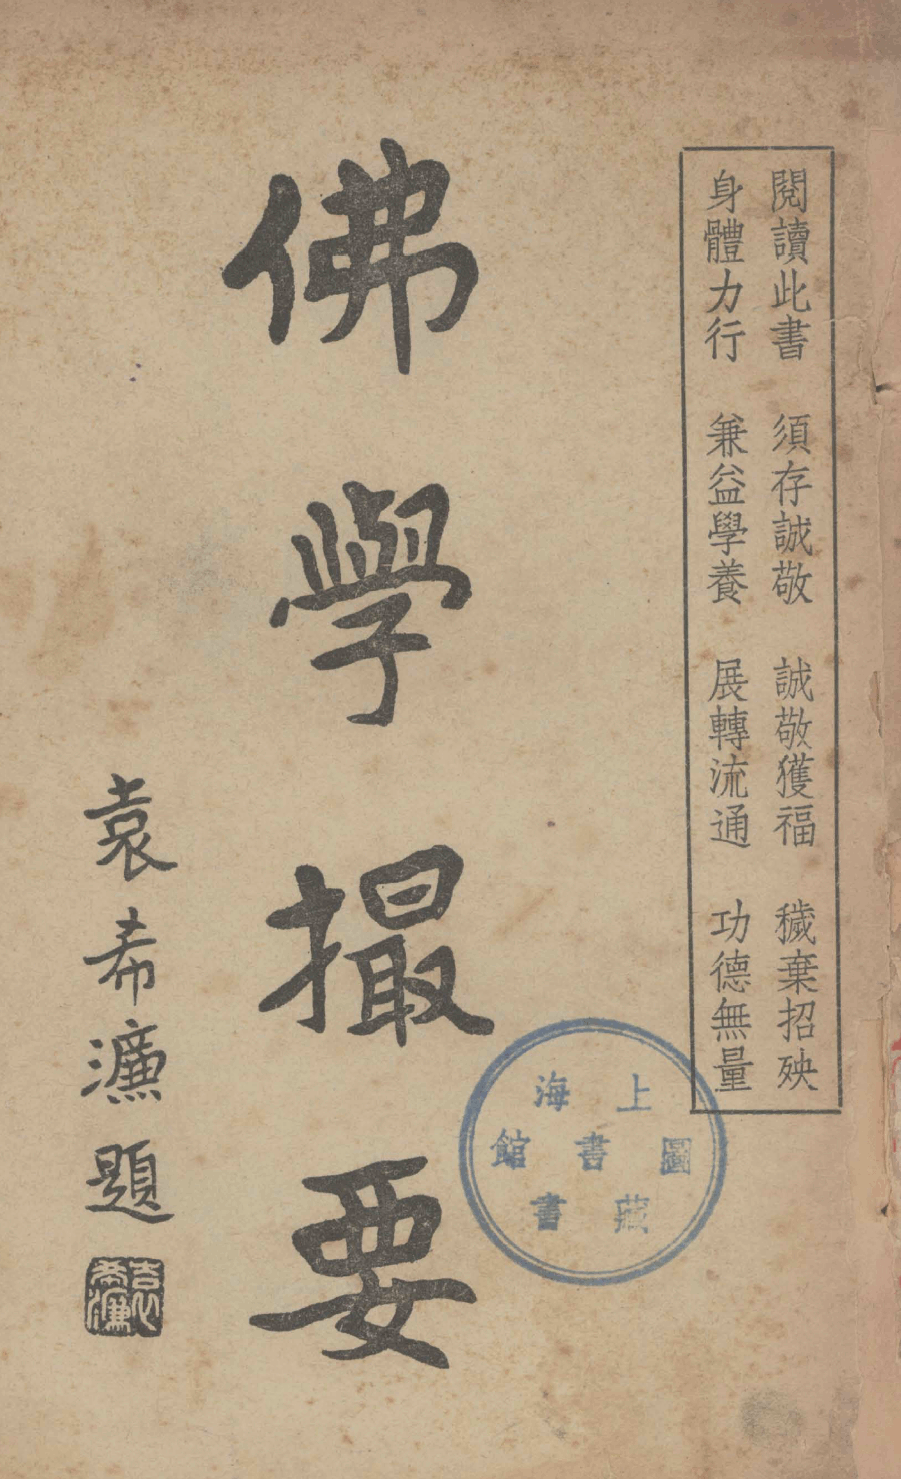 File:Foxue cuoyao 1941.png